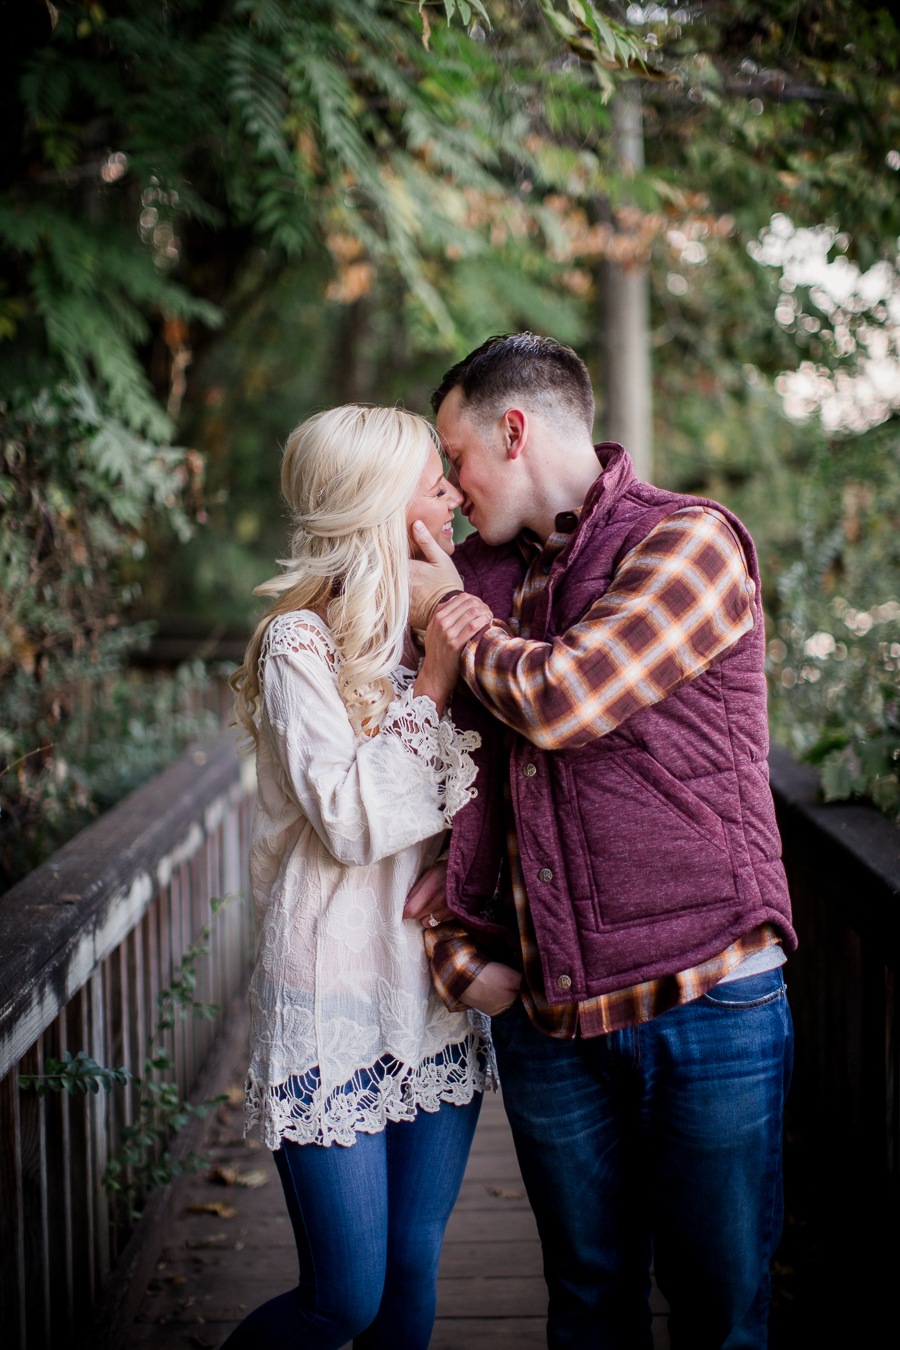 Reaching across kissing her while walking engagement photo by Knoxville Wedding Photographer, Amanda May Photos.